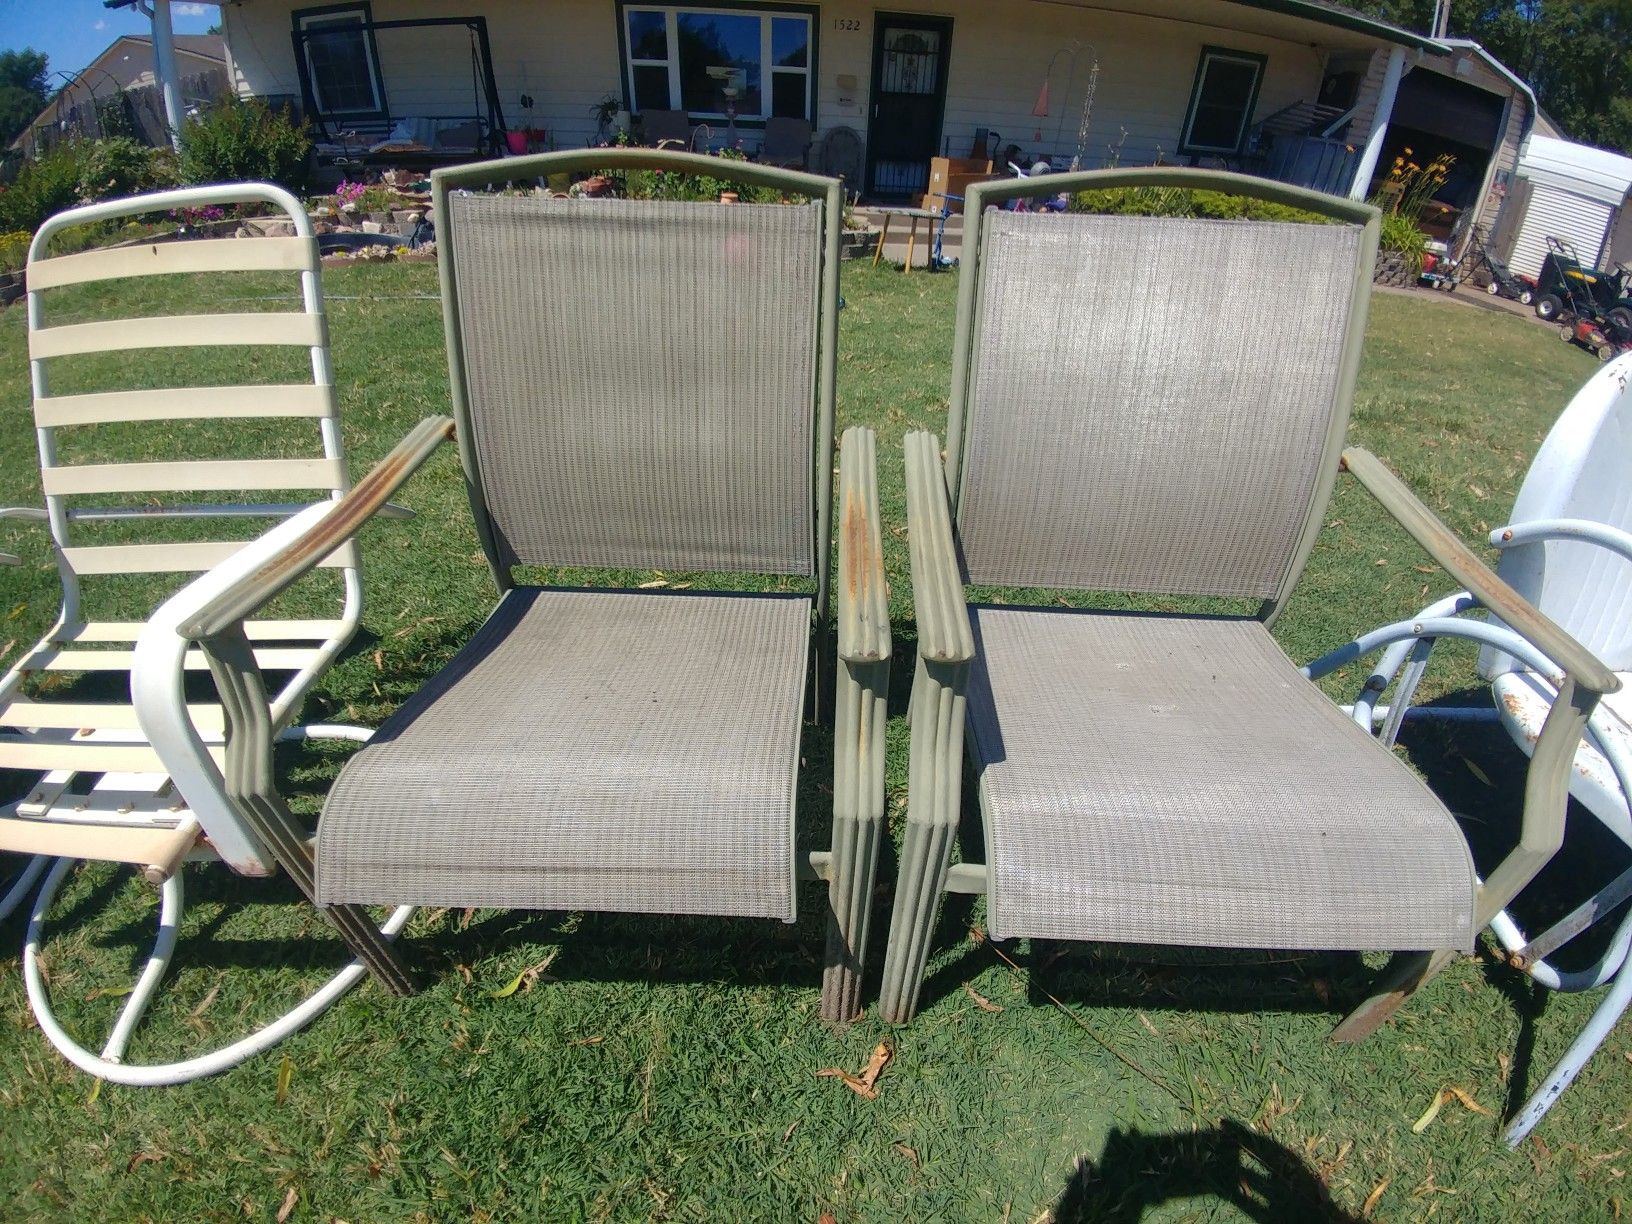 Aluminum lawn chairs $25 for the pair